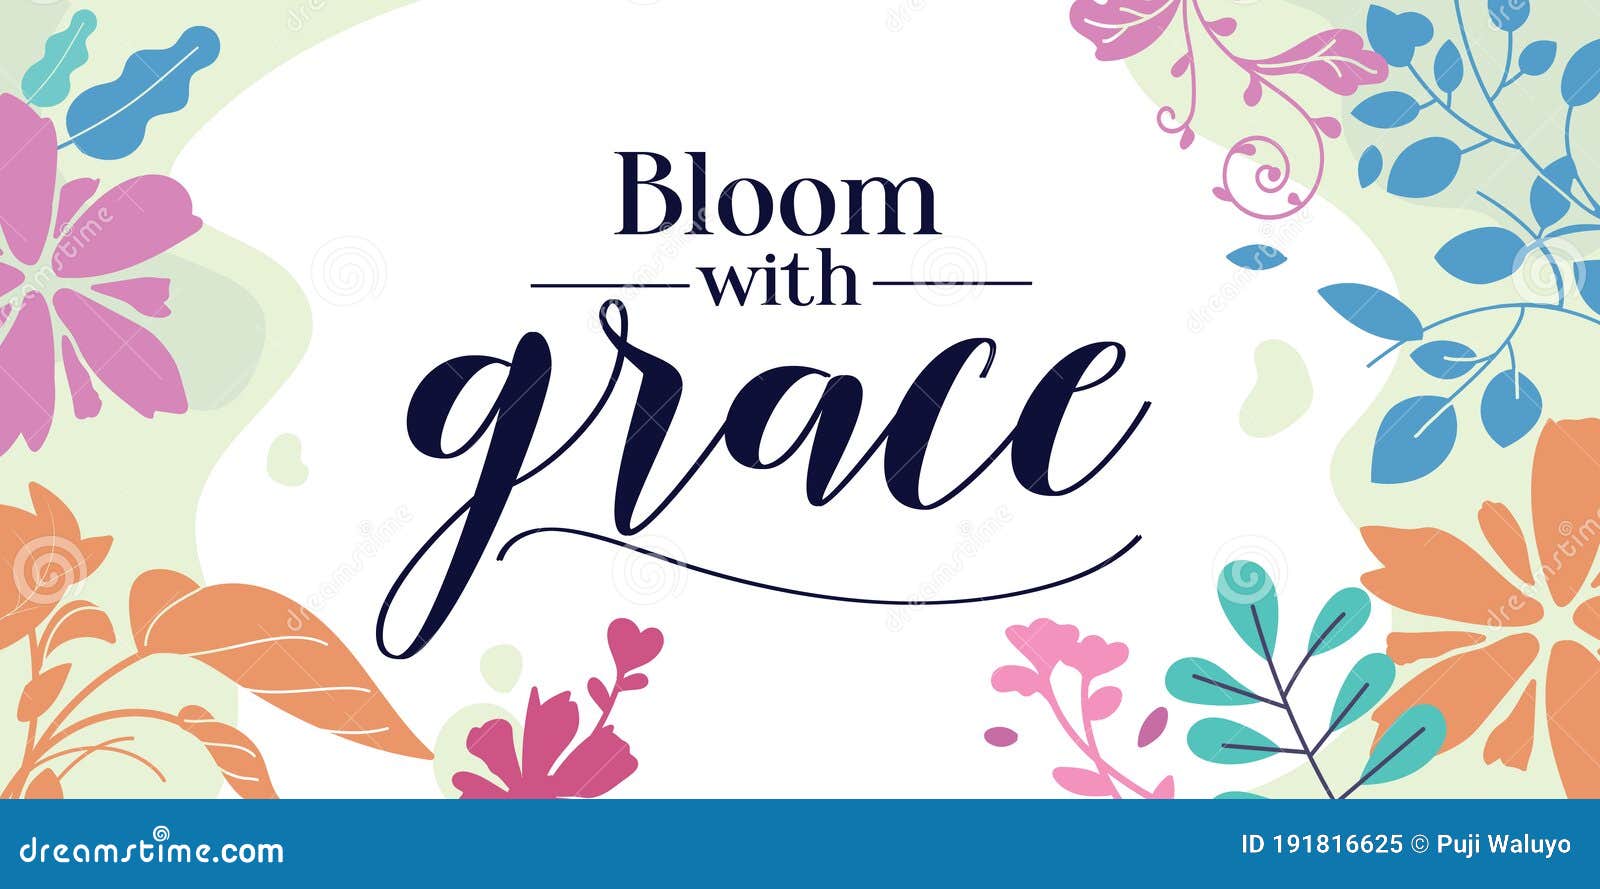 bloom with grace faith quote